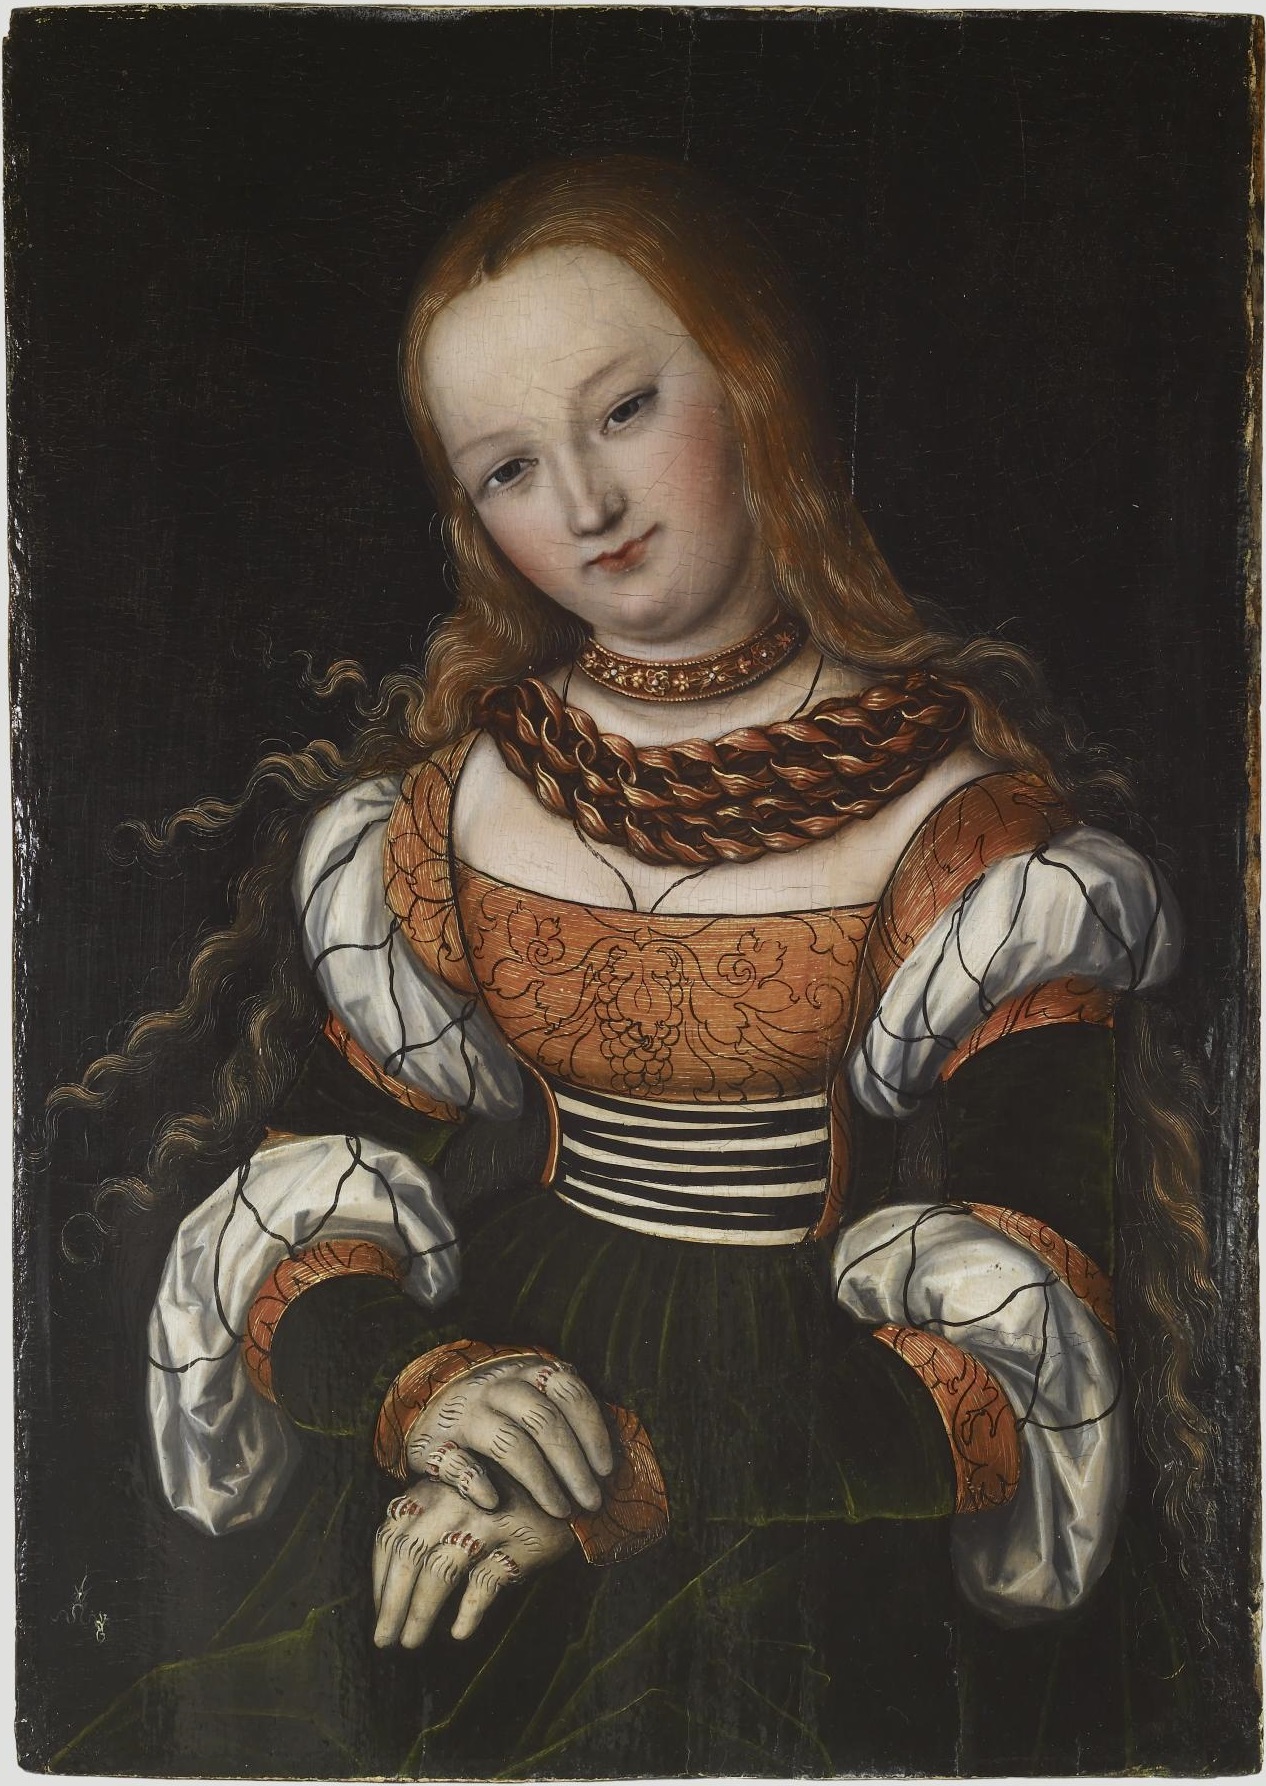 Cranach 1525 ca_possibly Mary_Magdalene _Walters Art Museum Baltimore